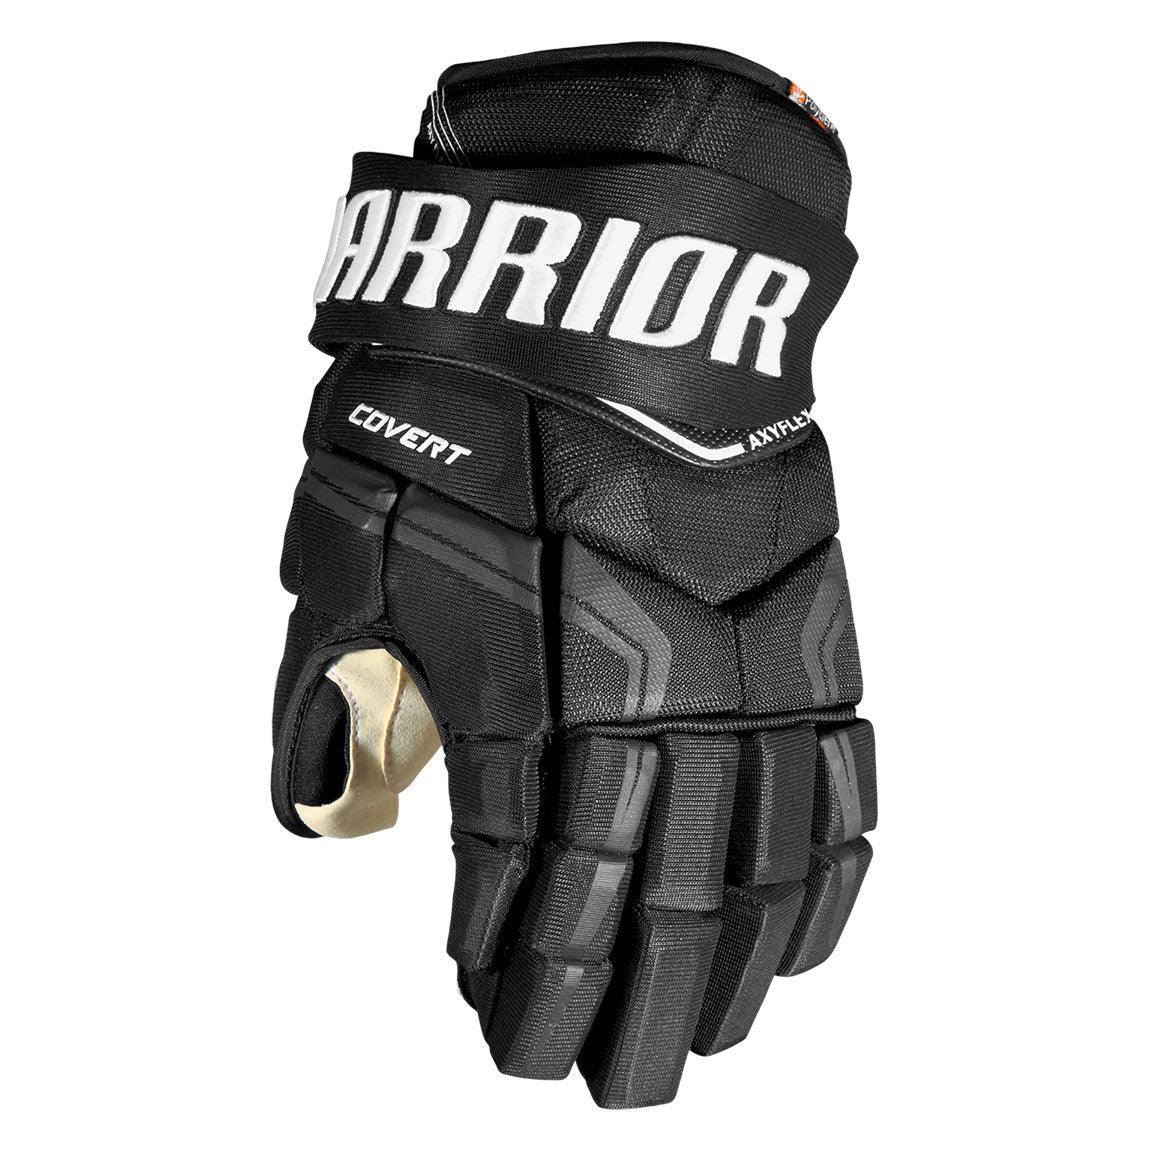 Covert QRE 3 Hockey Glove - Junior - Sports Excellence